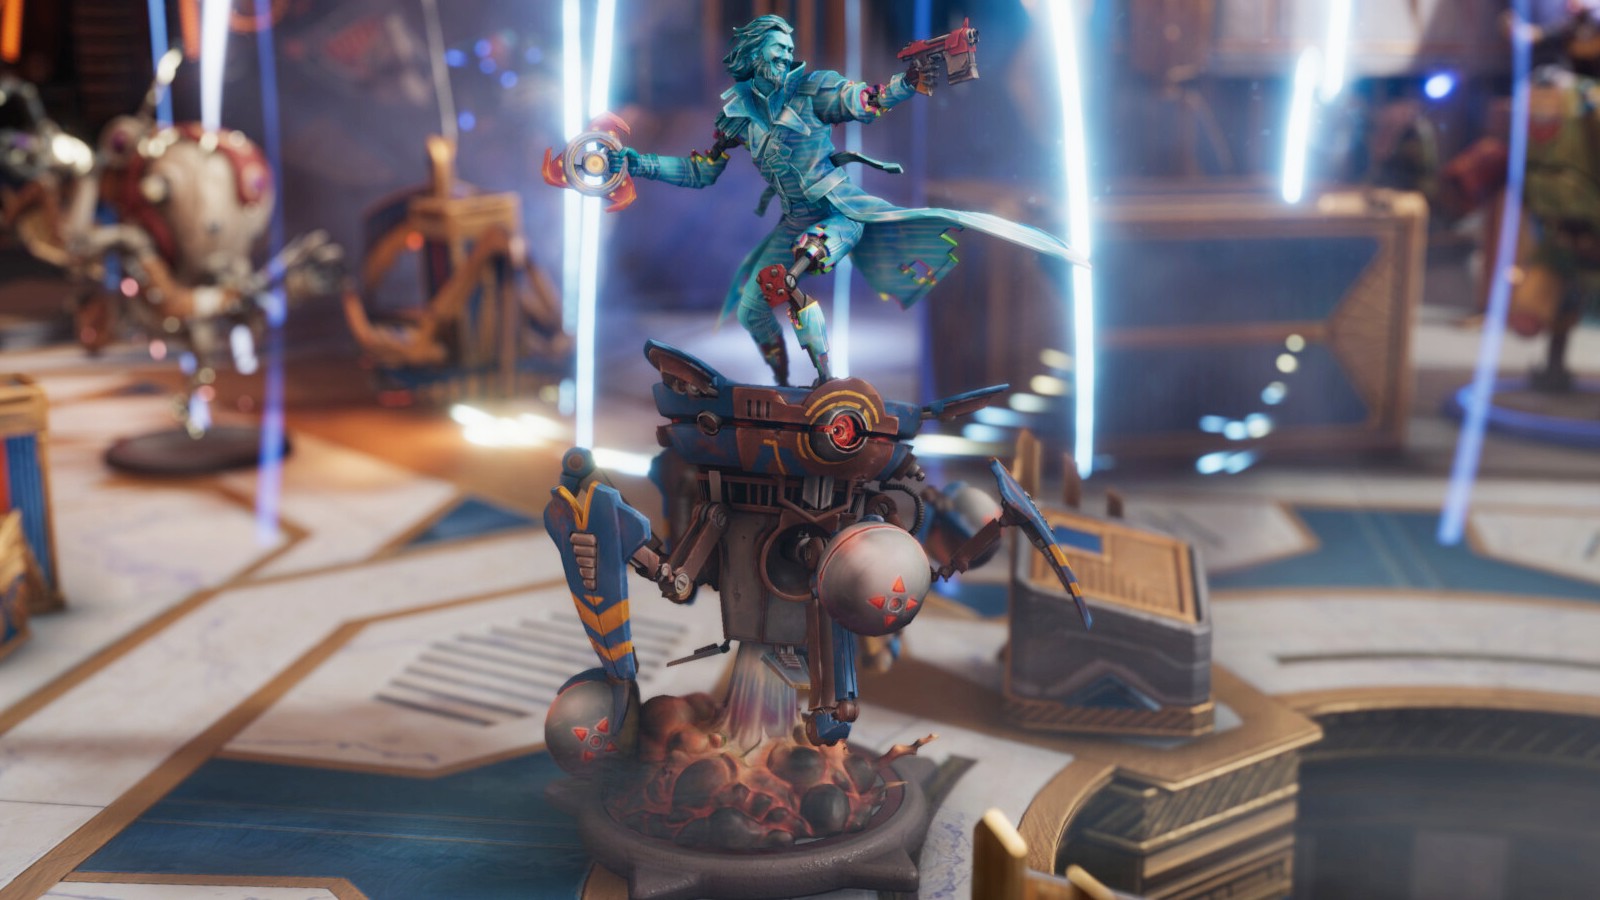 Moonbreaker turns classic tabletop games into virtual turn-based chaos